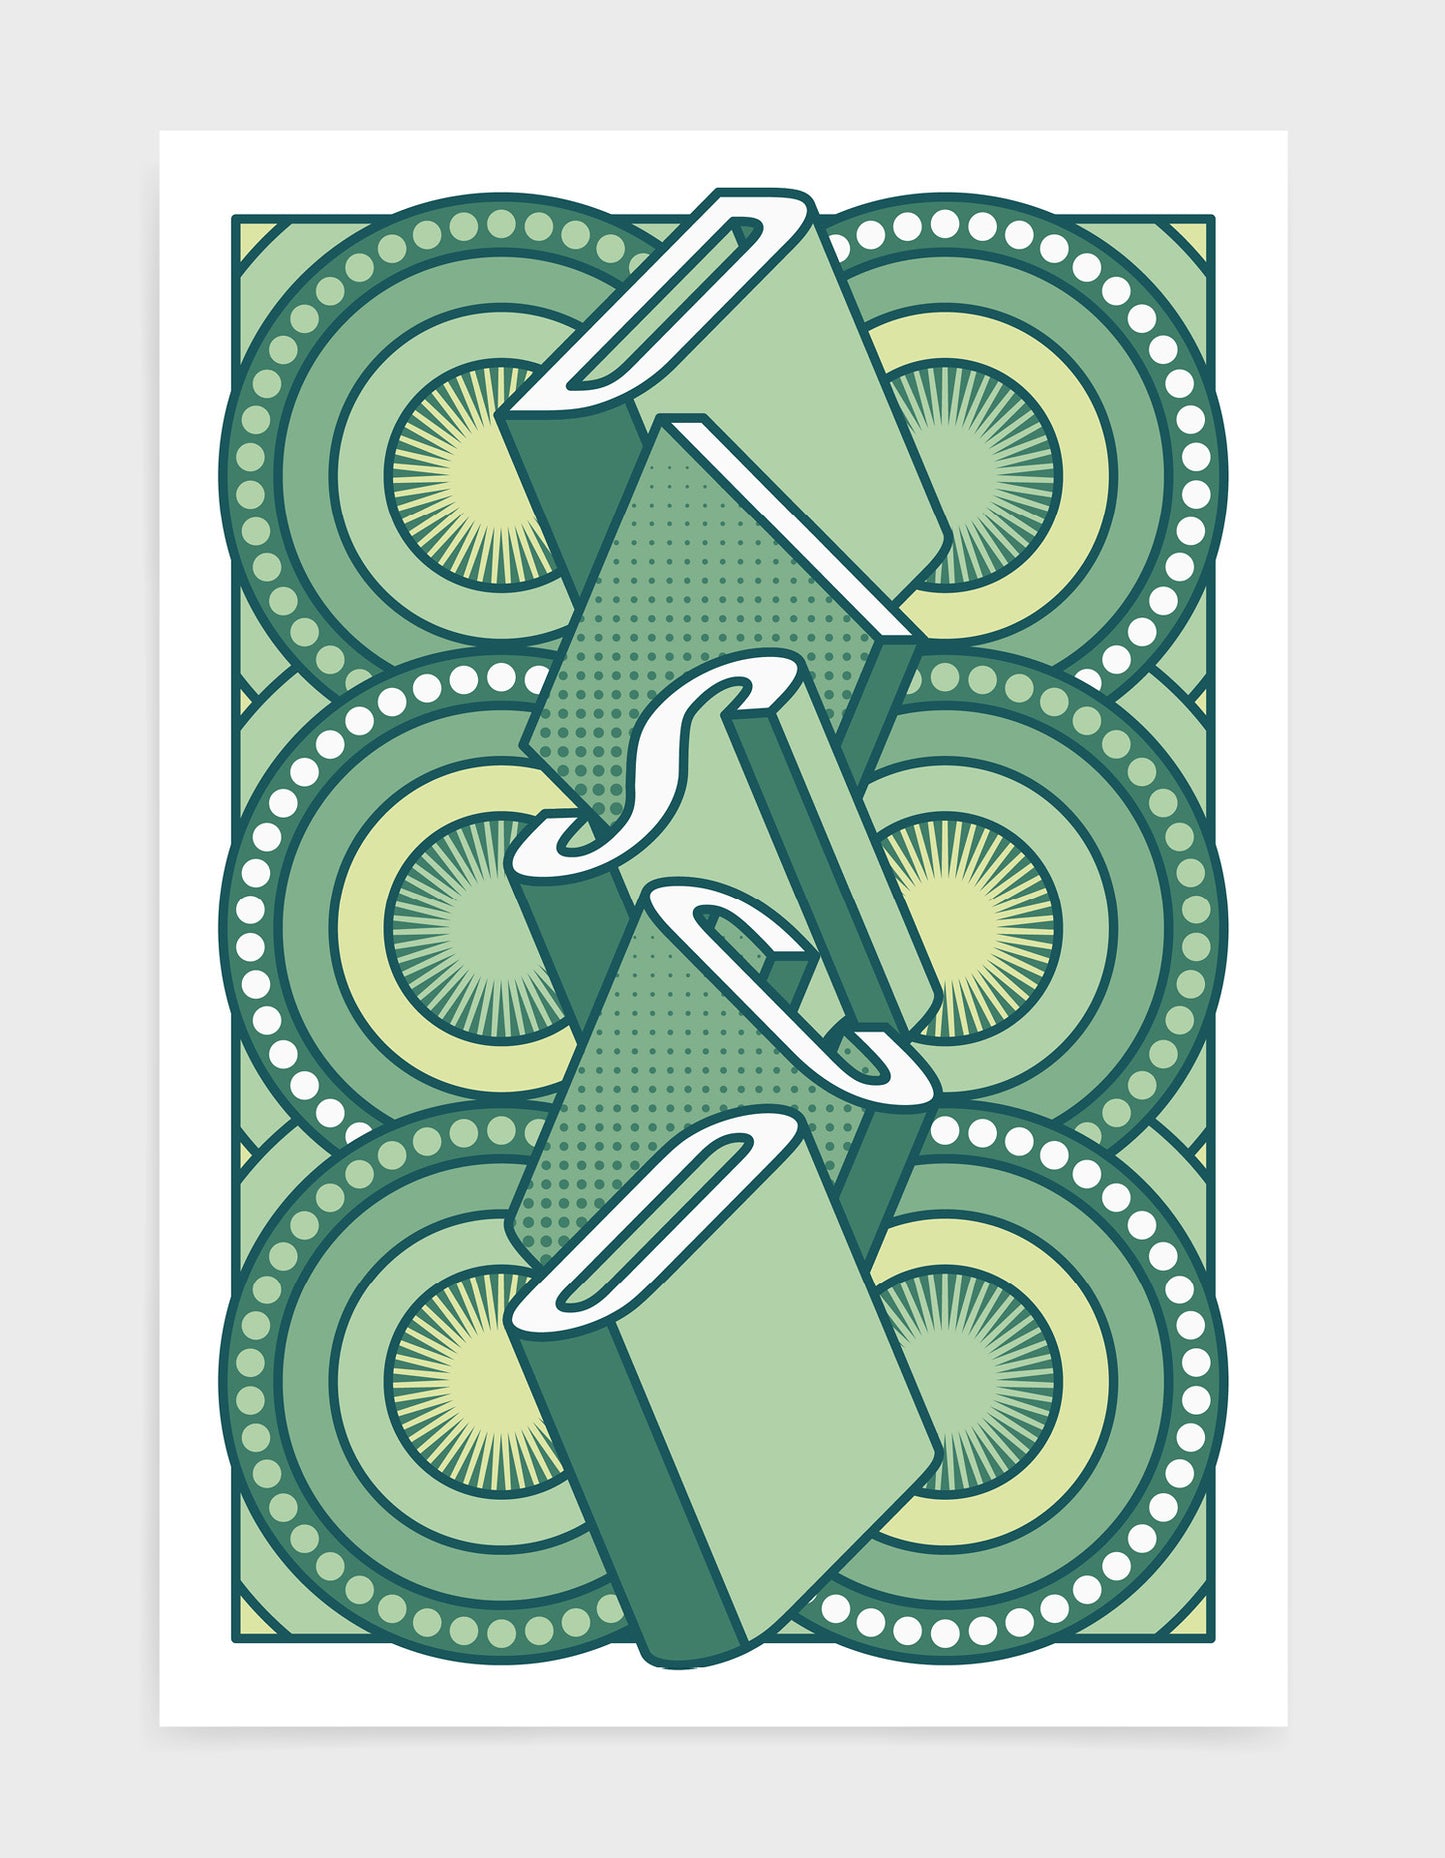 disco music art print featuring a geometric abstract pattern in bold shapes and green colours. Block typography depicts the word disco in tumbling text